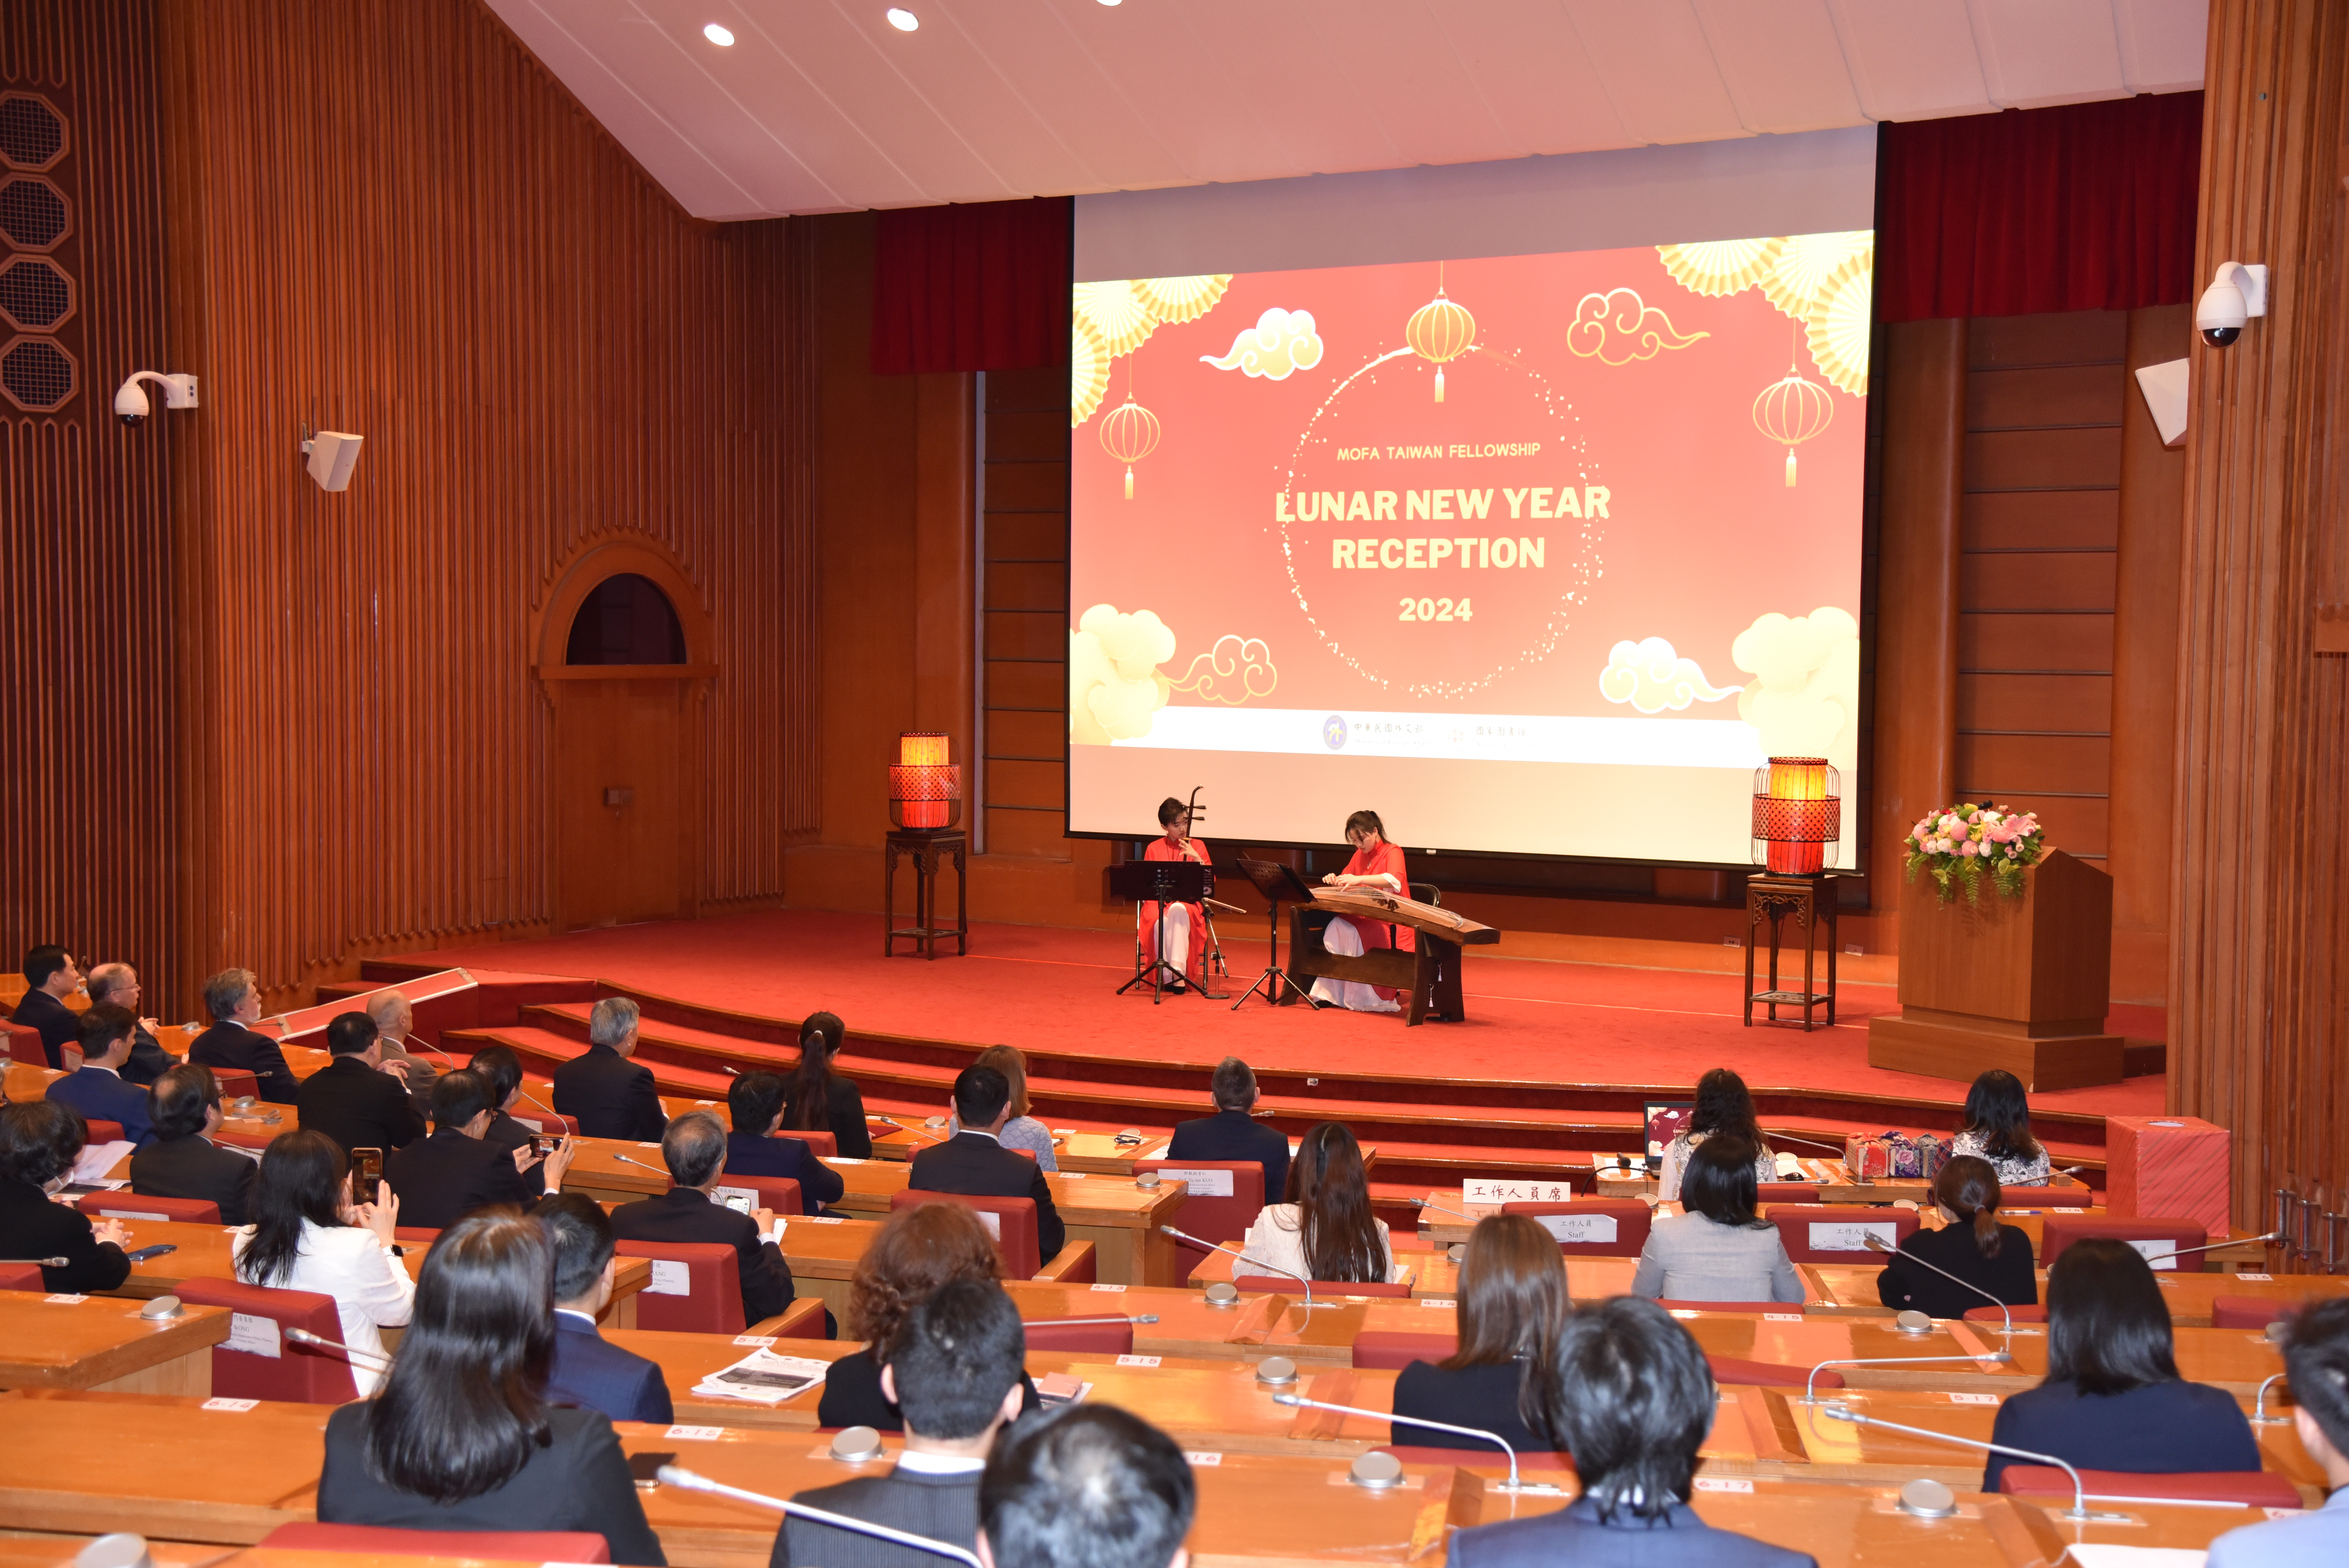 2024 MOFA Taiwan Fellowship New Year Reception and Lantern Festival:picture1